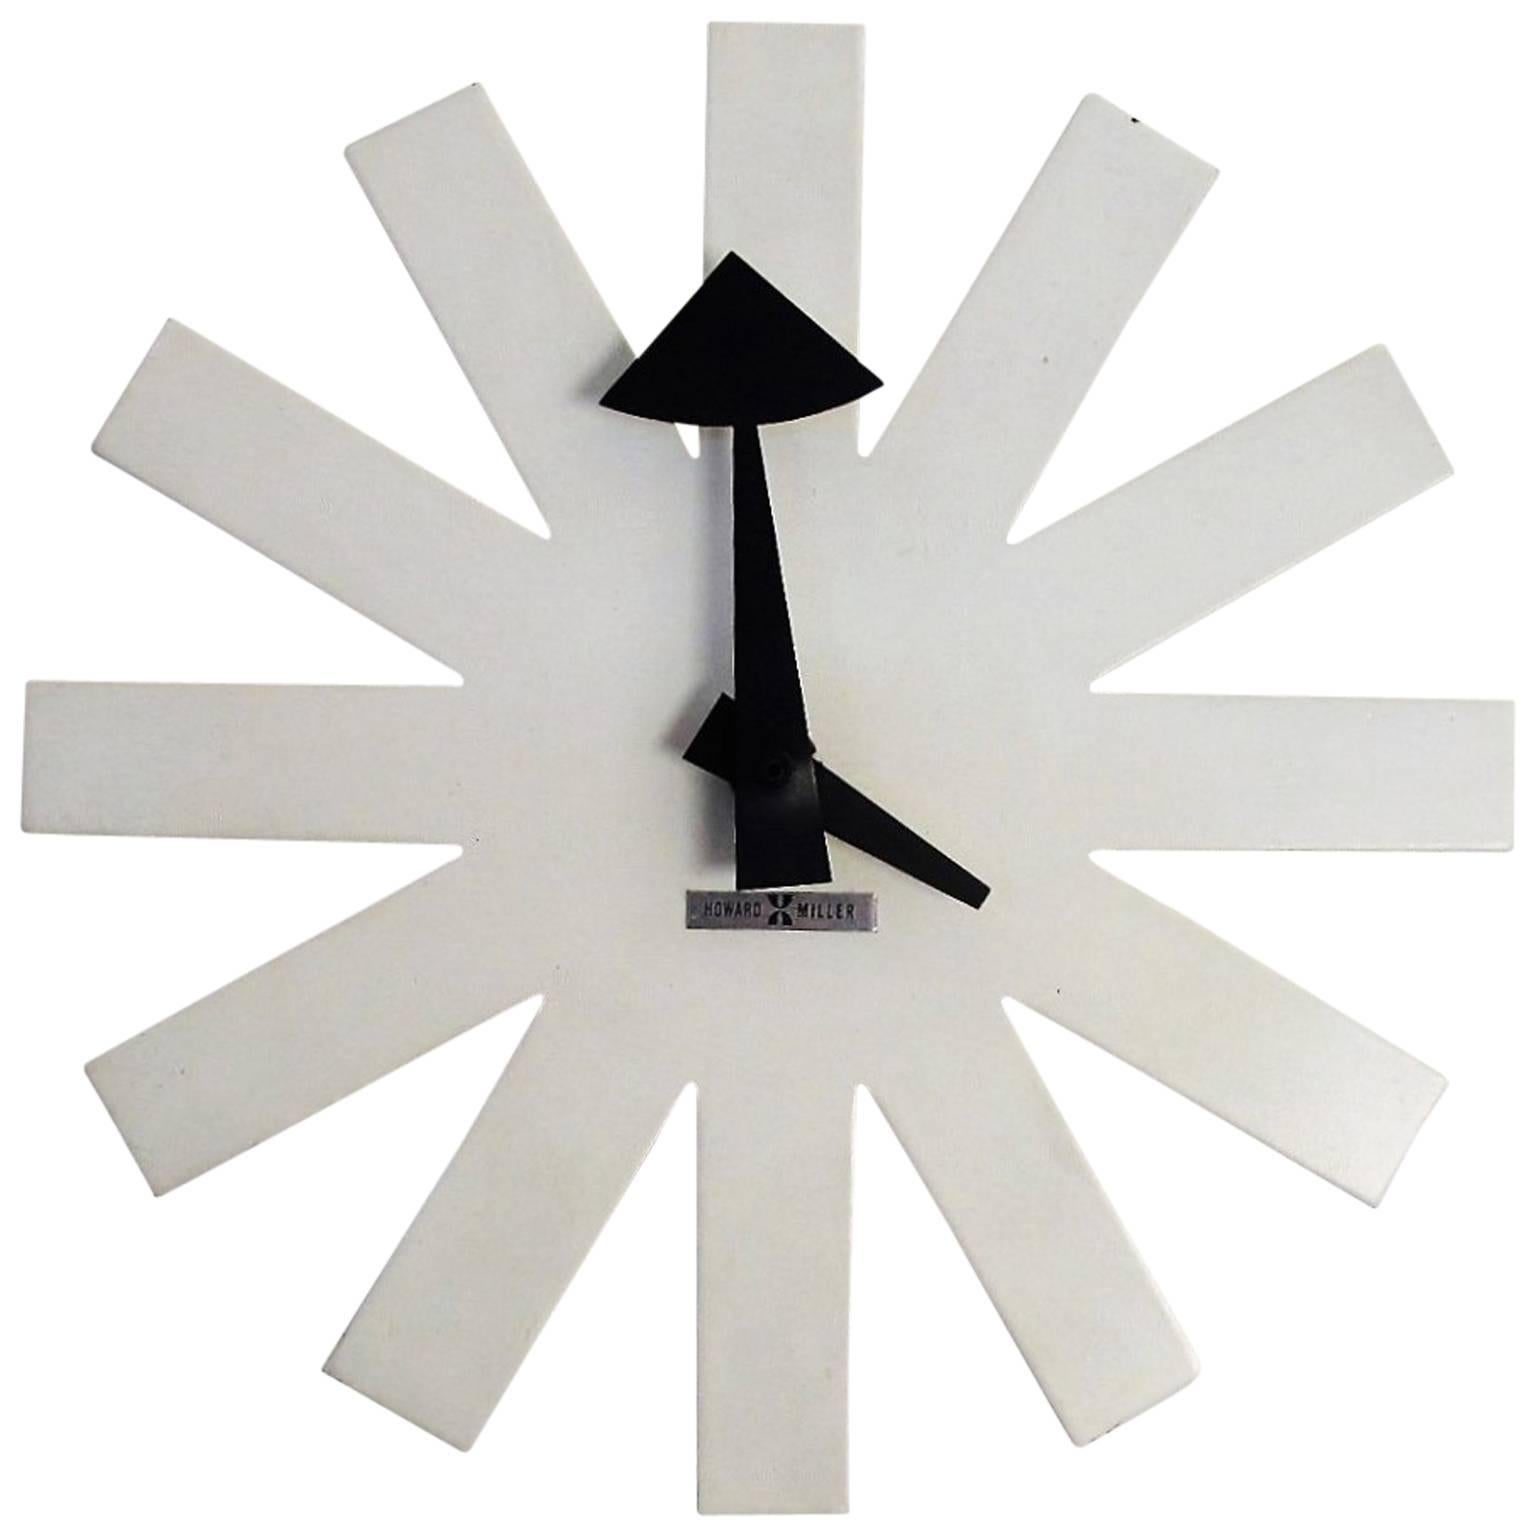 George Nelson Asterisk or Snowflake Cordless Wall Clock Howard Miller